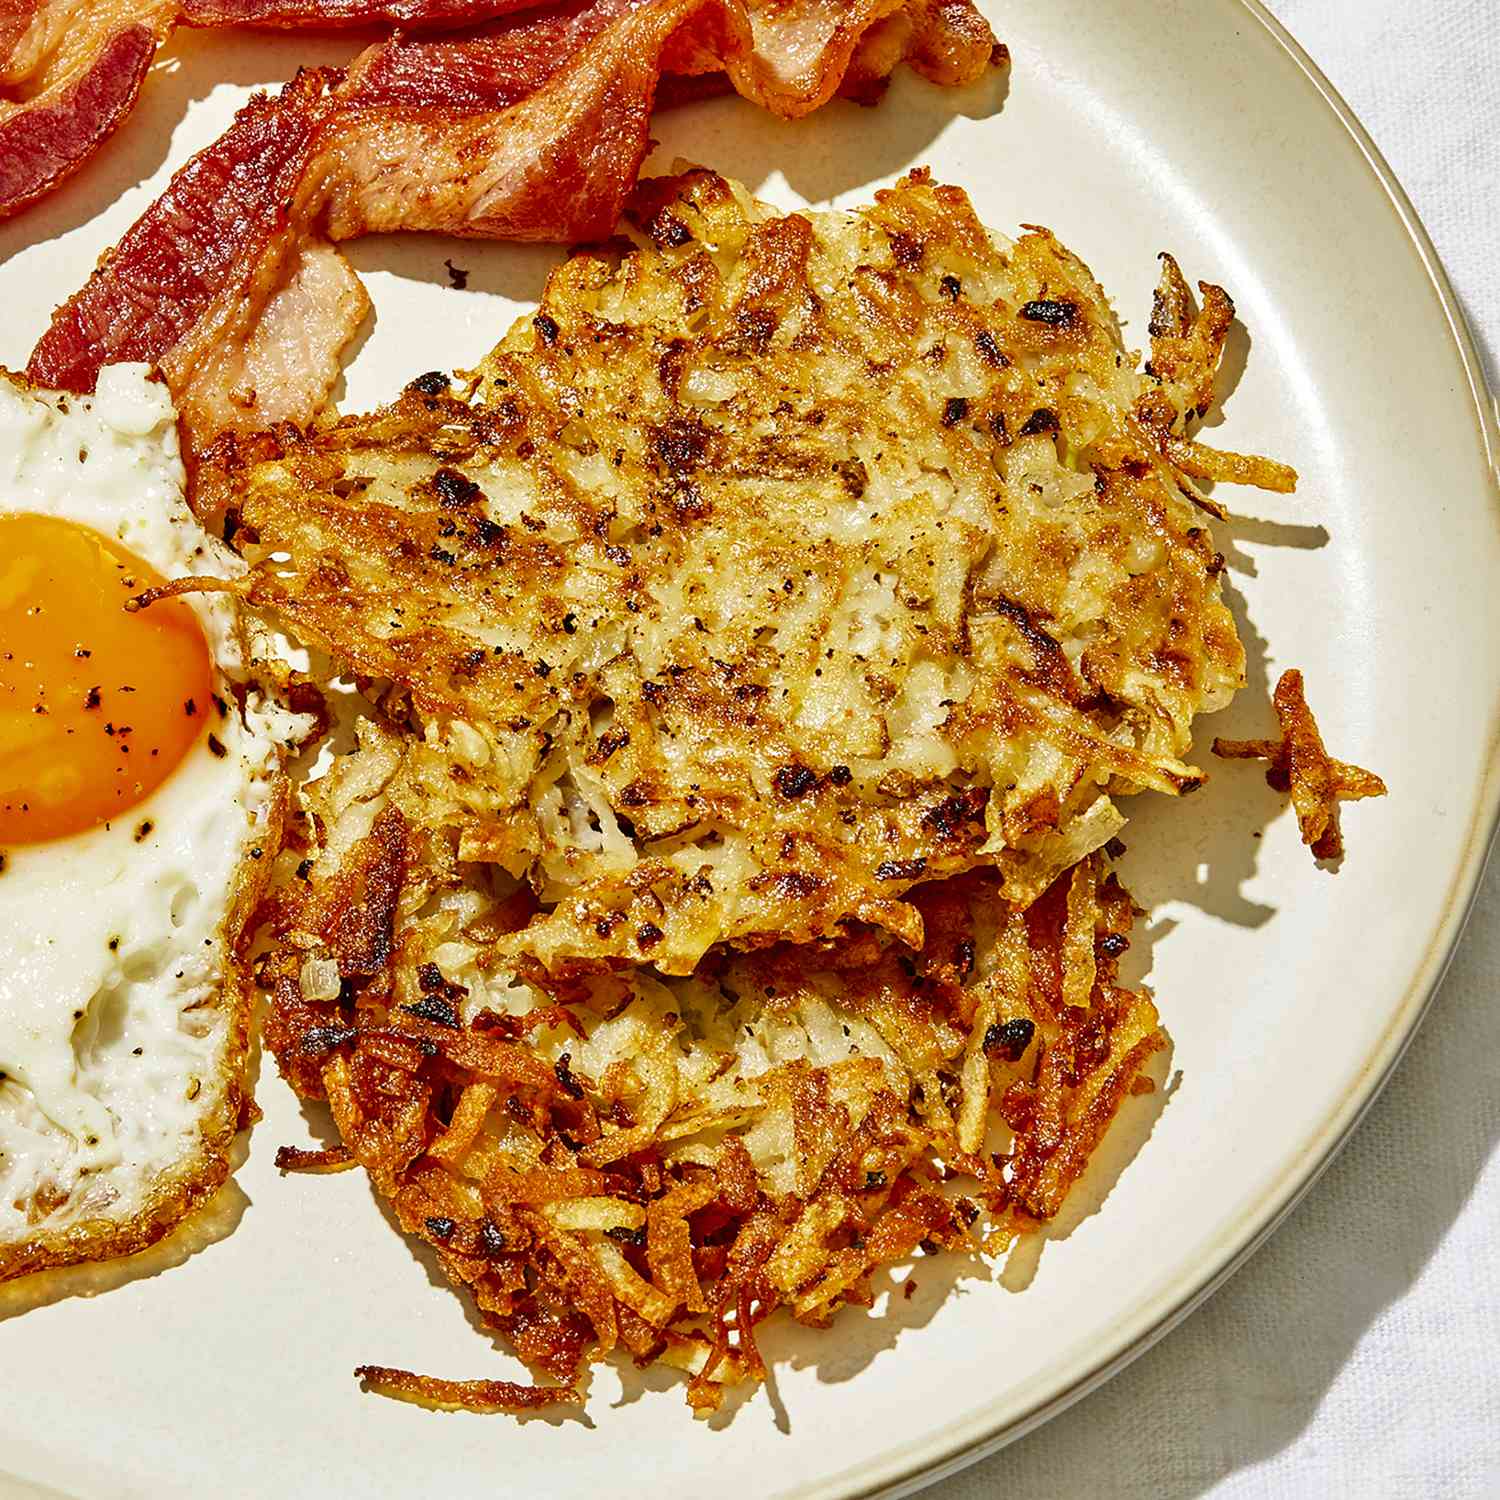 a close up view of two crispy hashbrown patties served with an over easy egg and crispy bacon